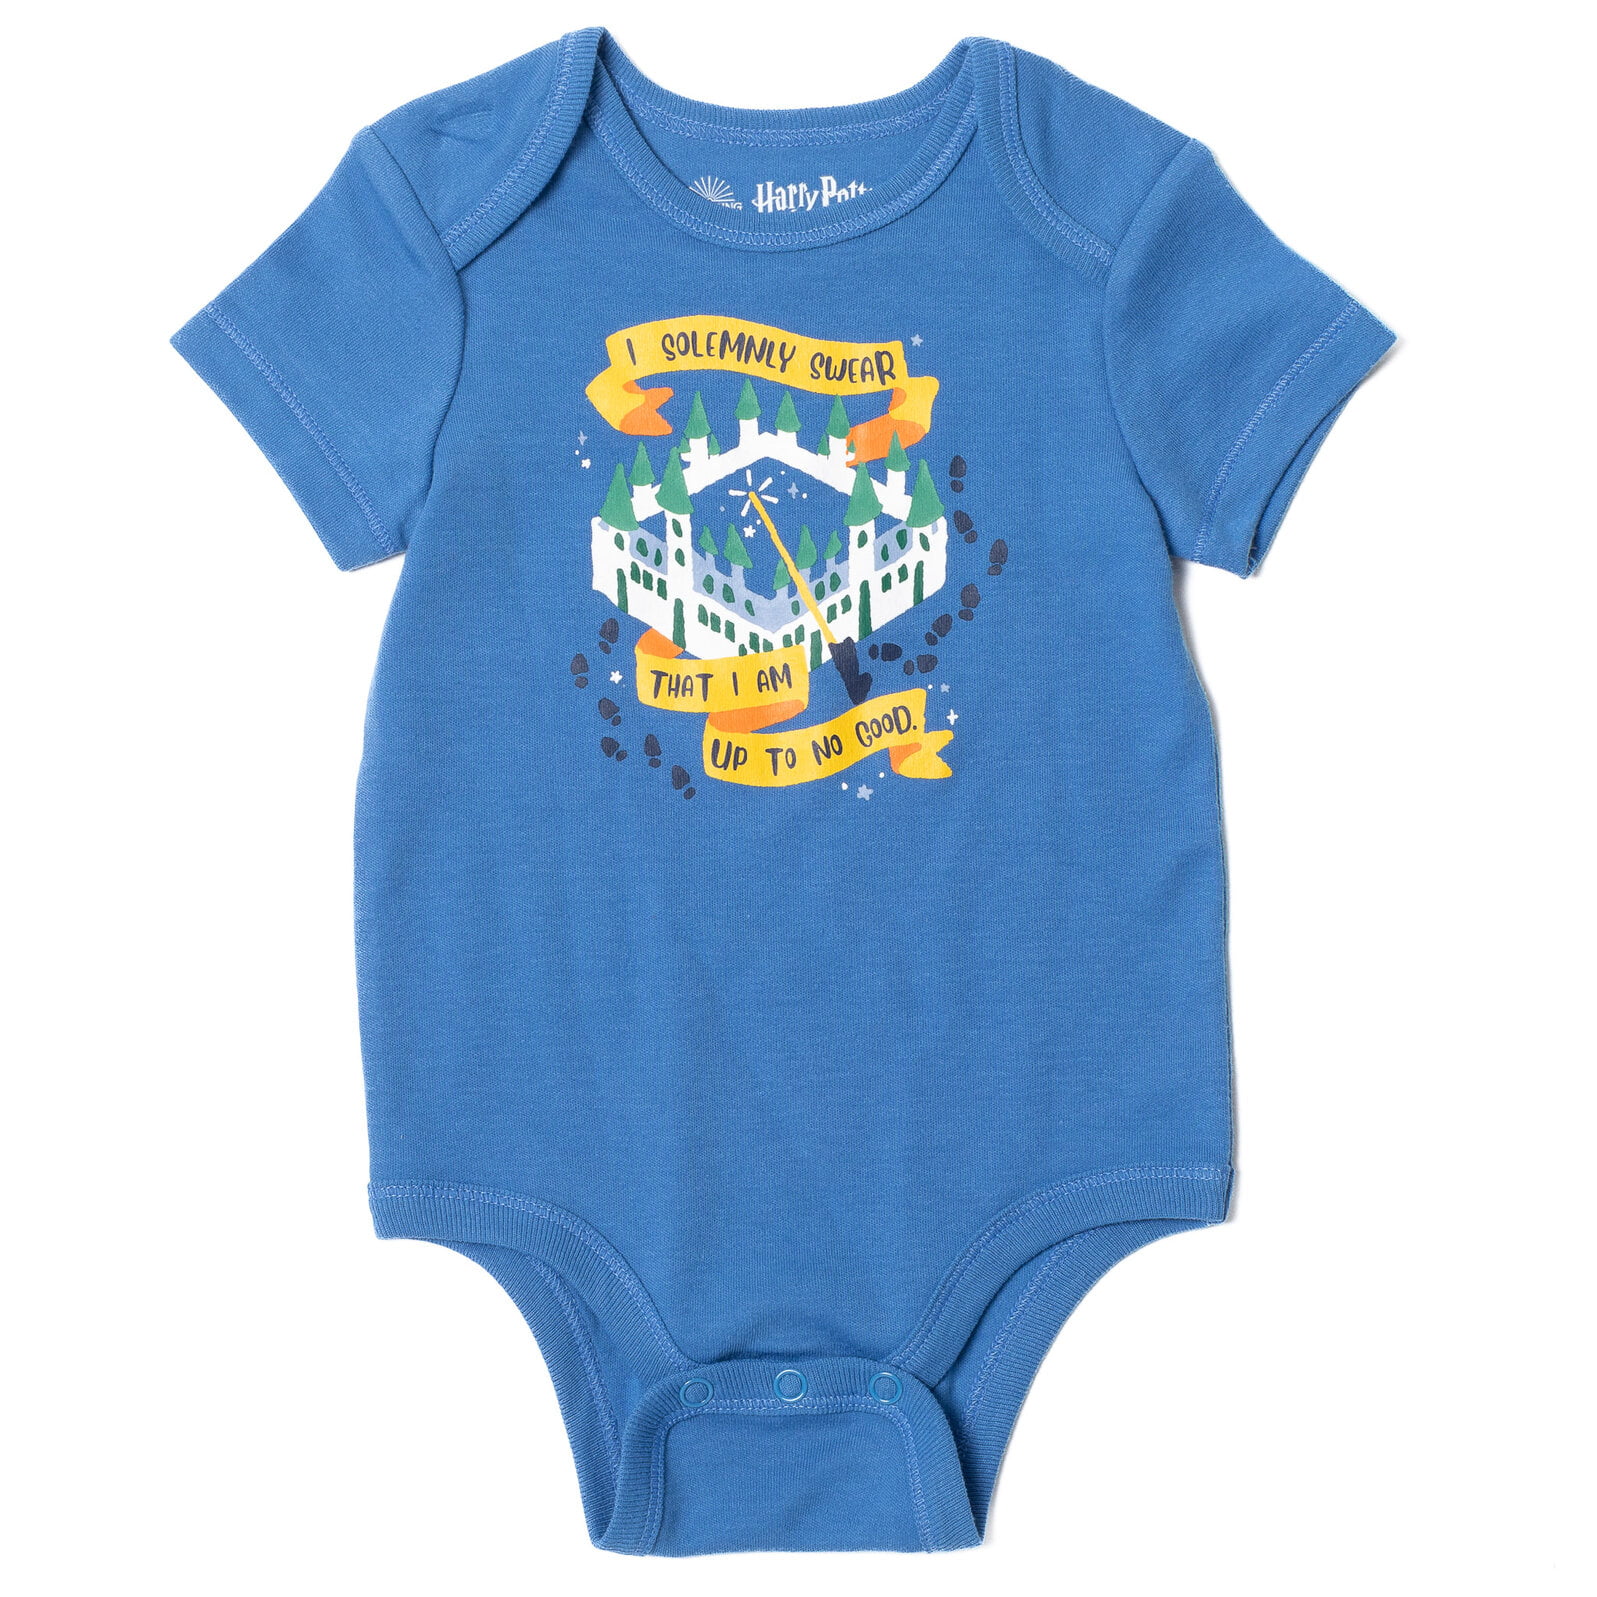 Harry Potter Baby I Solemnly Swear Up To No Good Legging Body Suit Com–  Seven Times Six